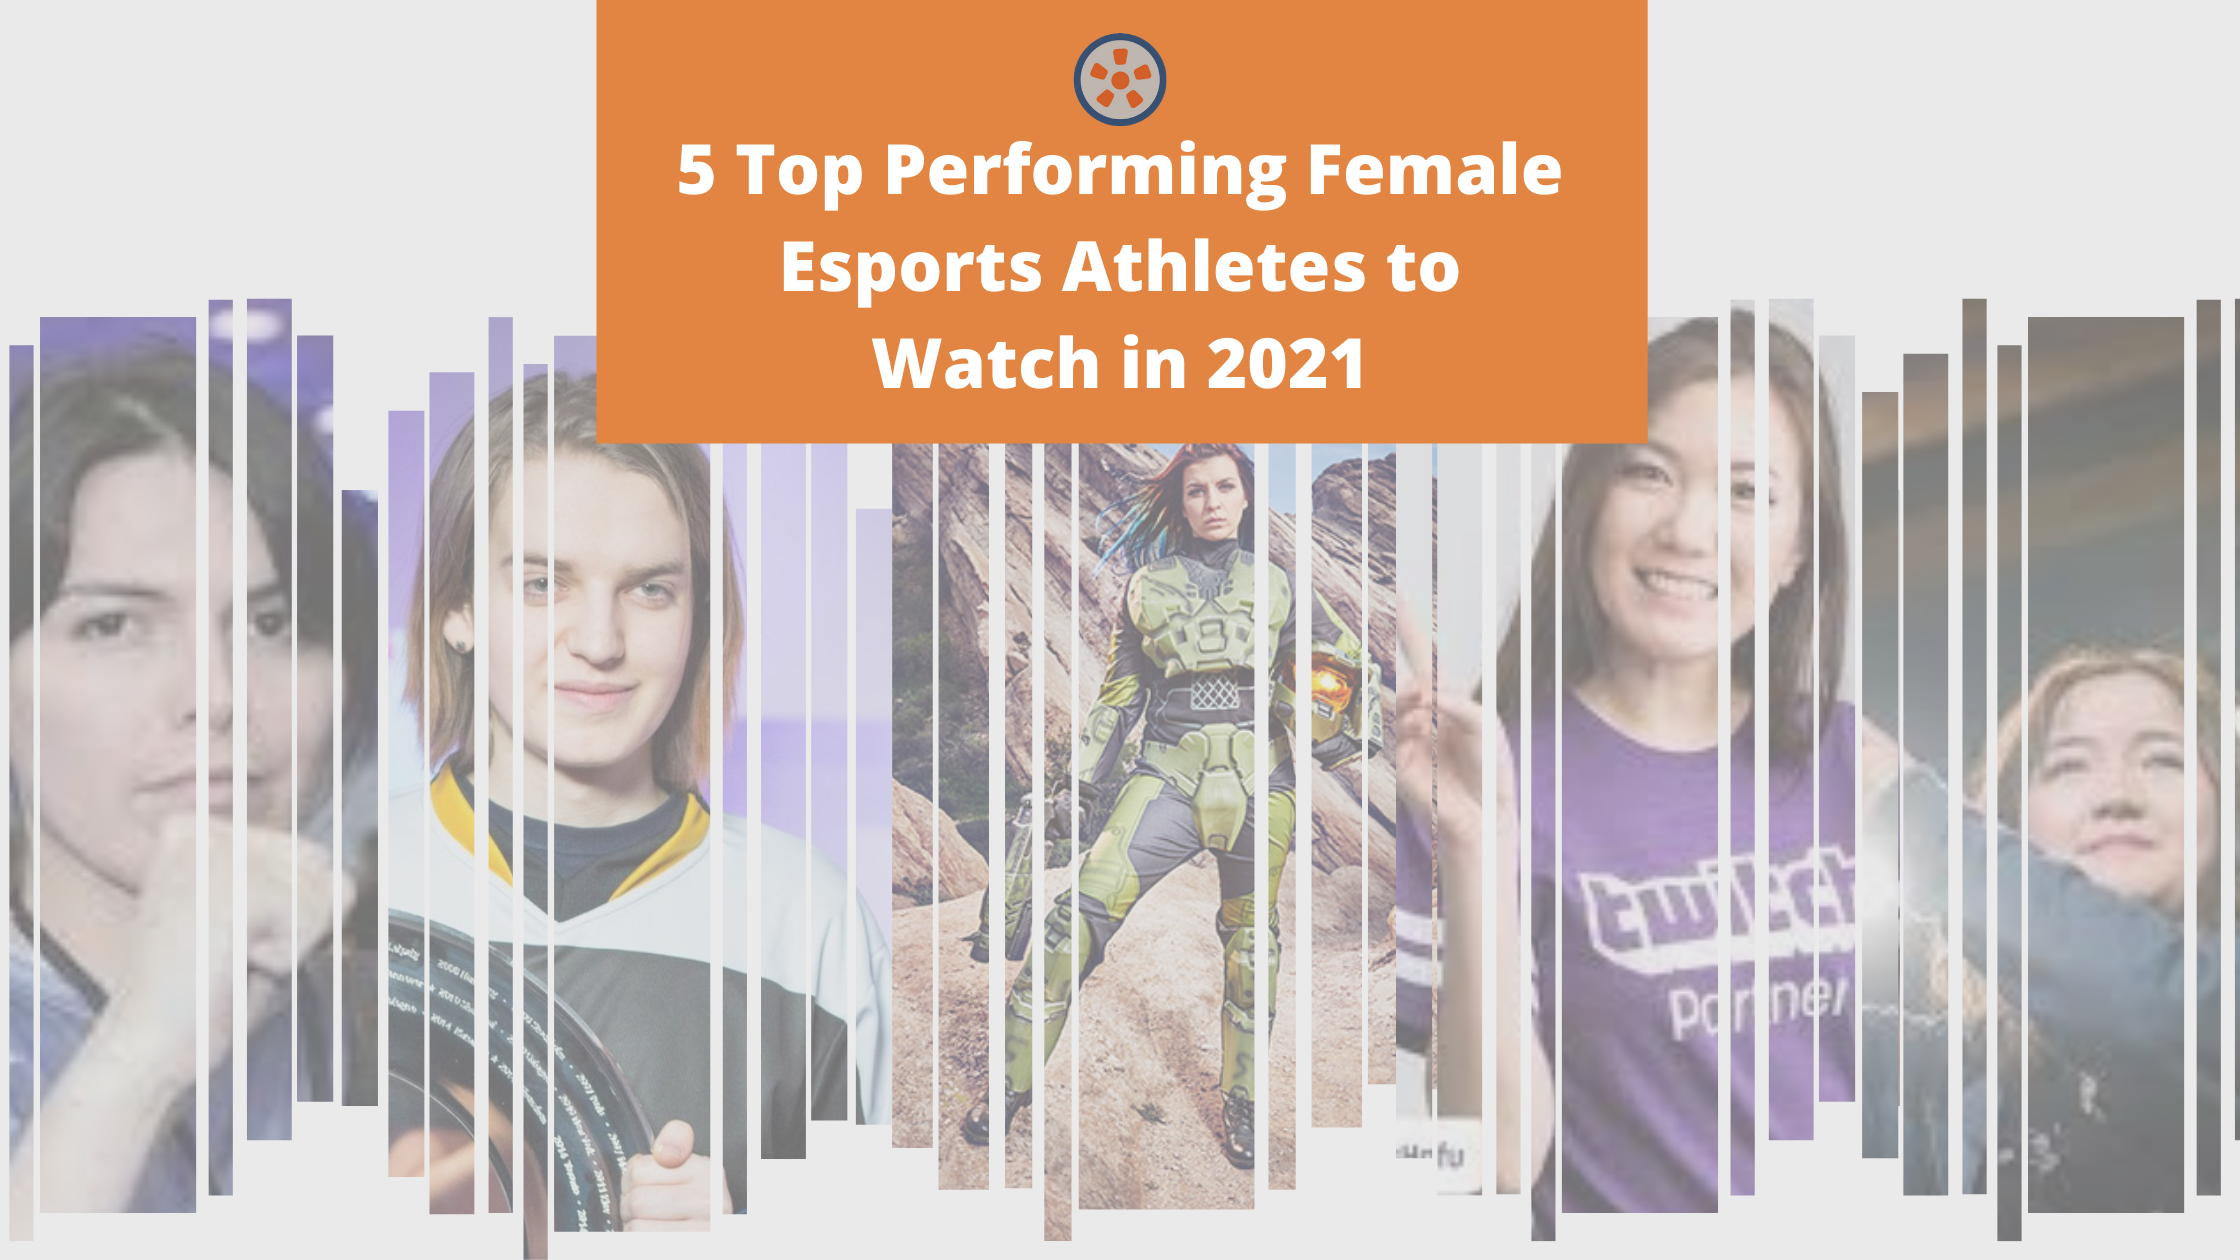 5 Top Performing Female Esports Athletes to Watch in 2021